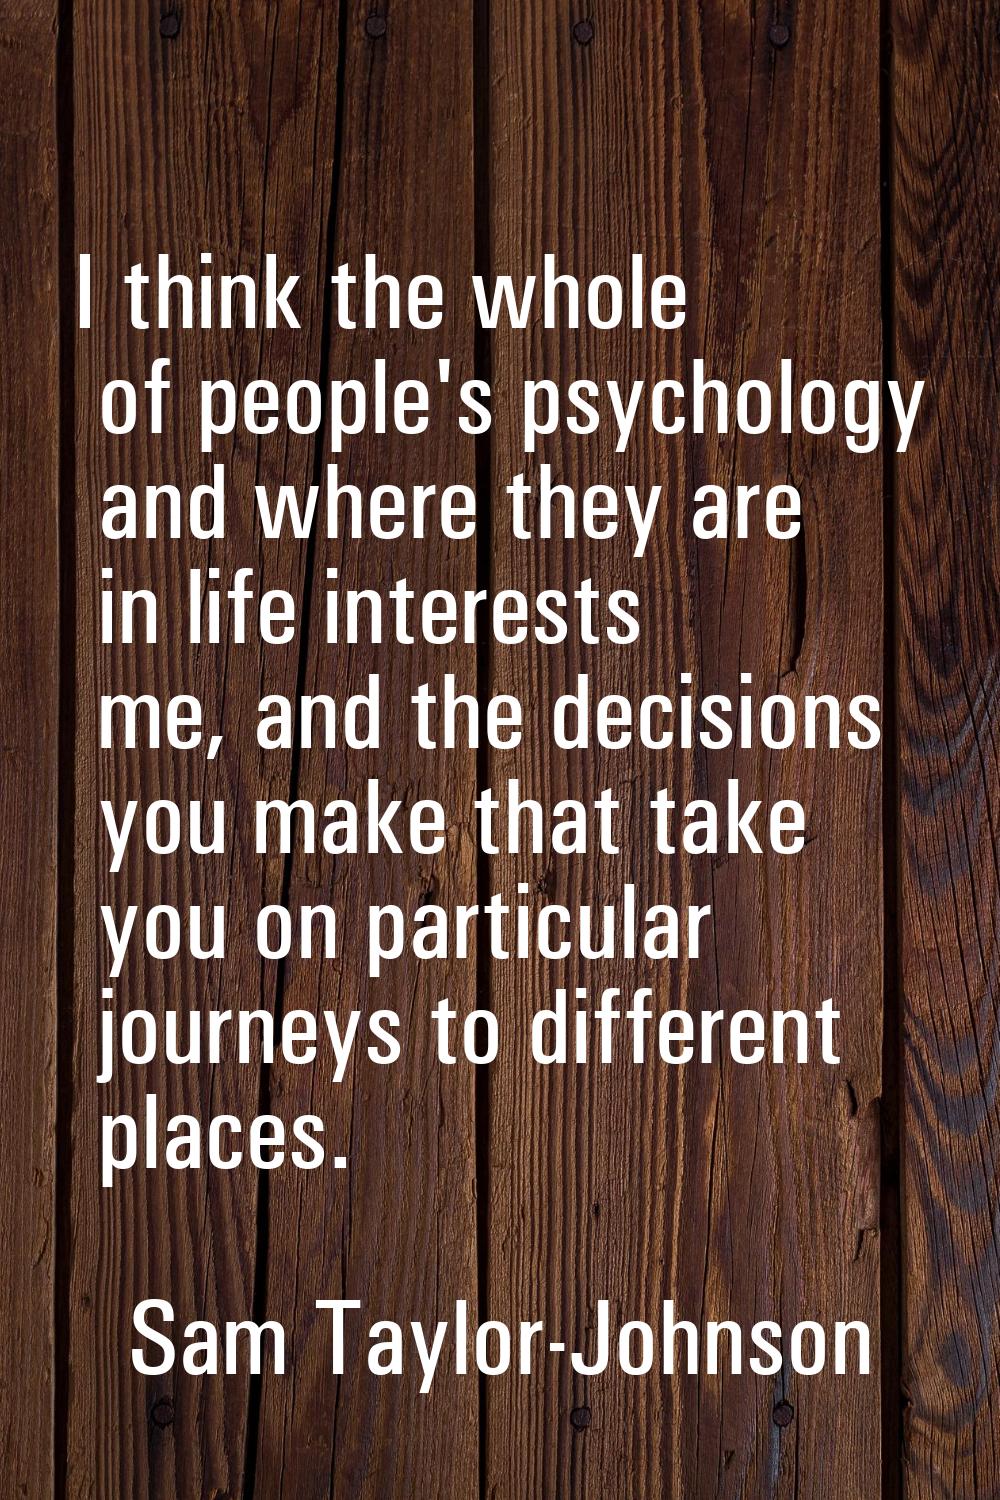 I think the whole of people's psychology and where they are in life interests me, and the decisions